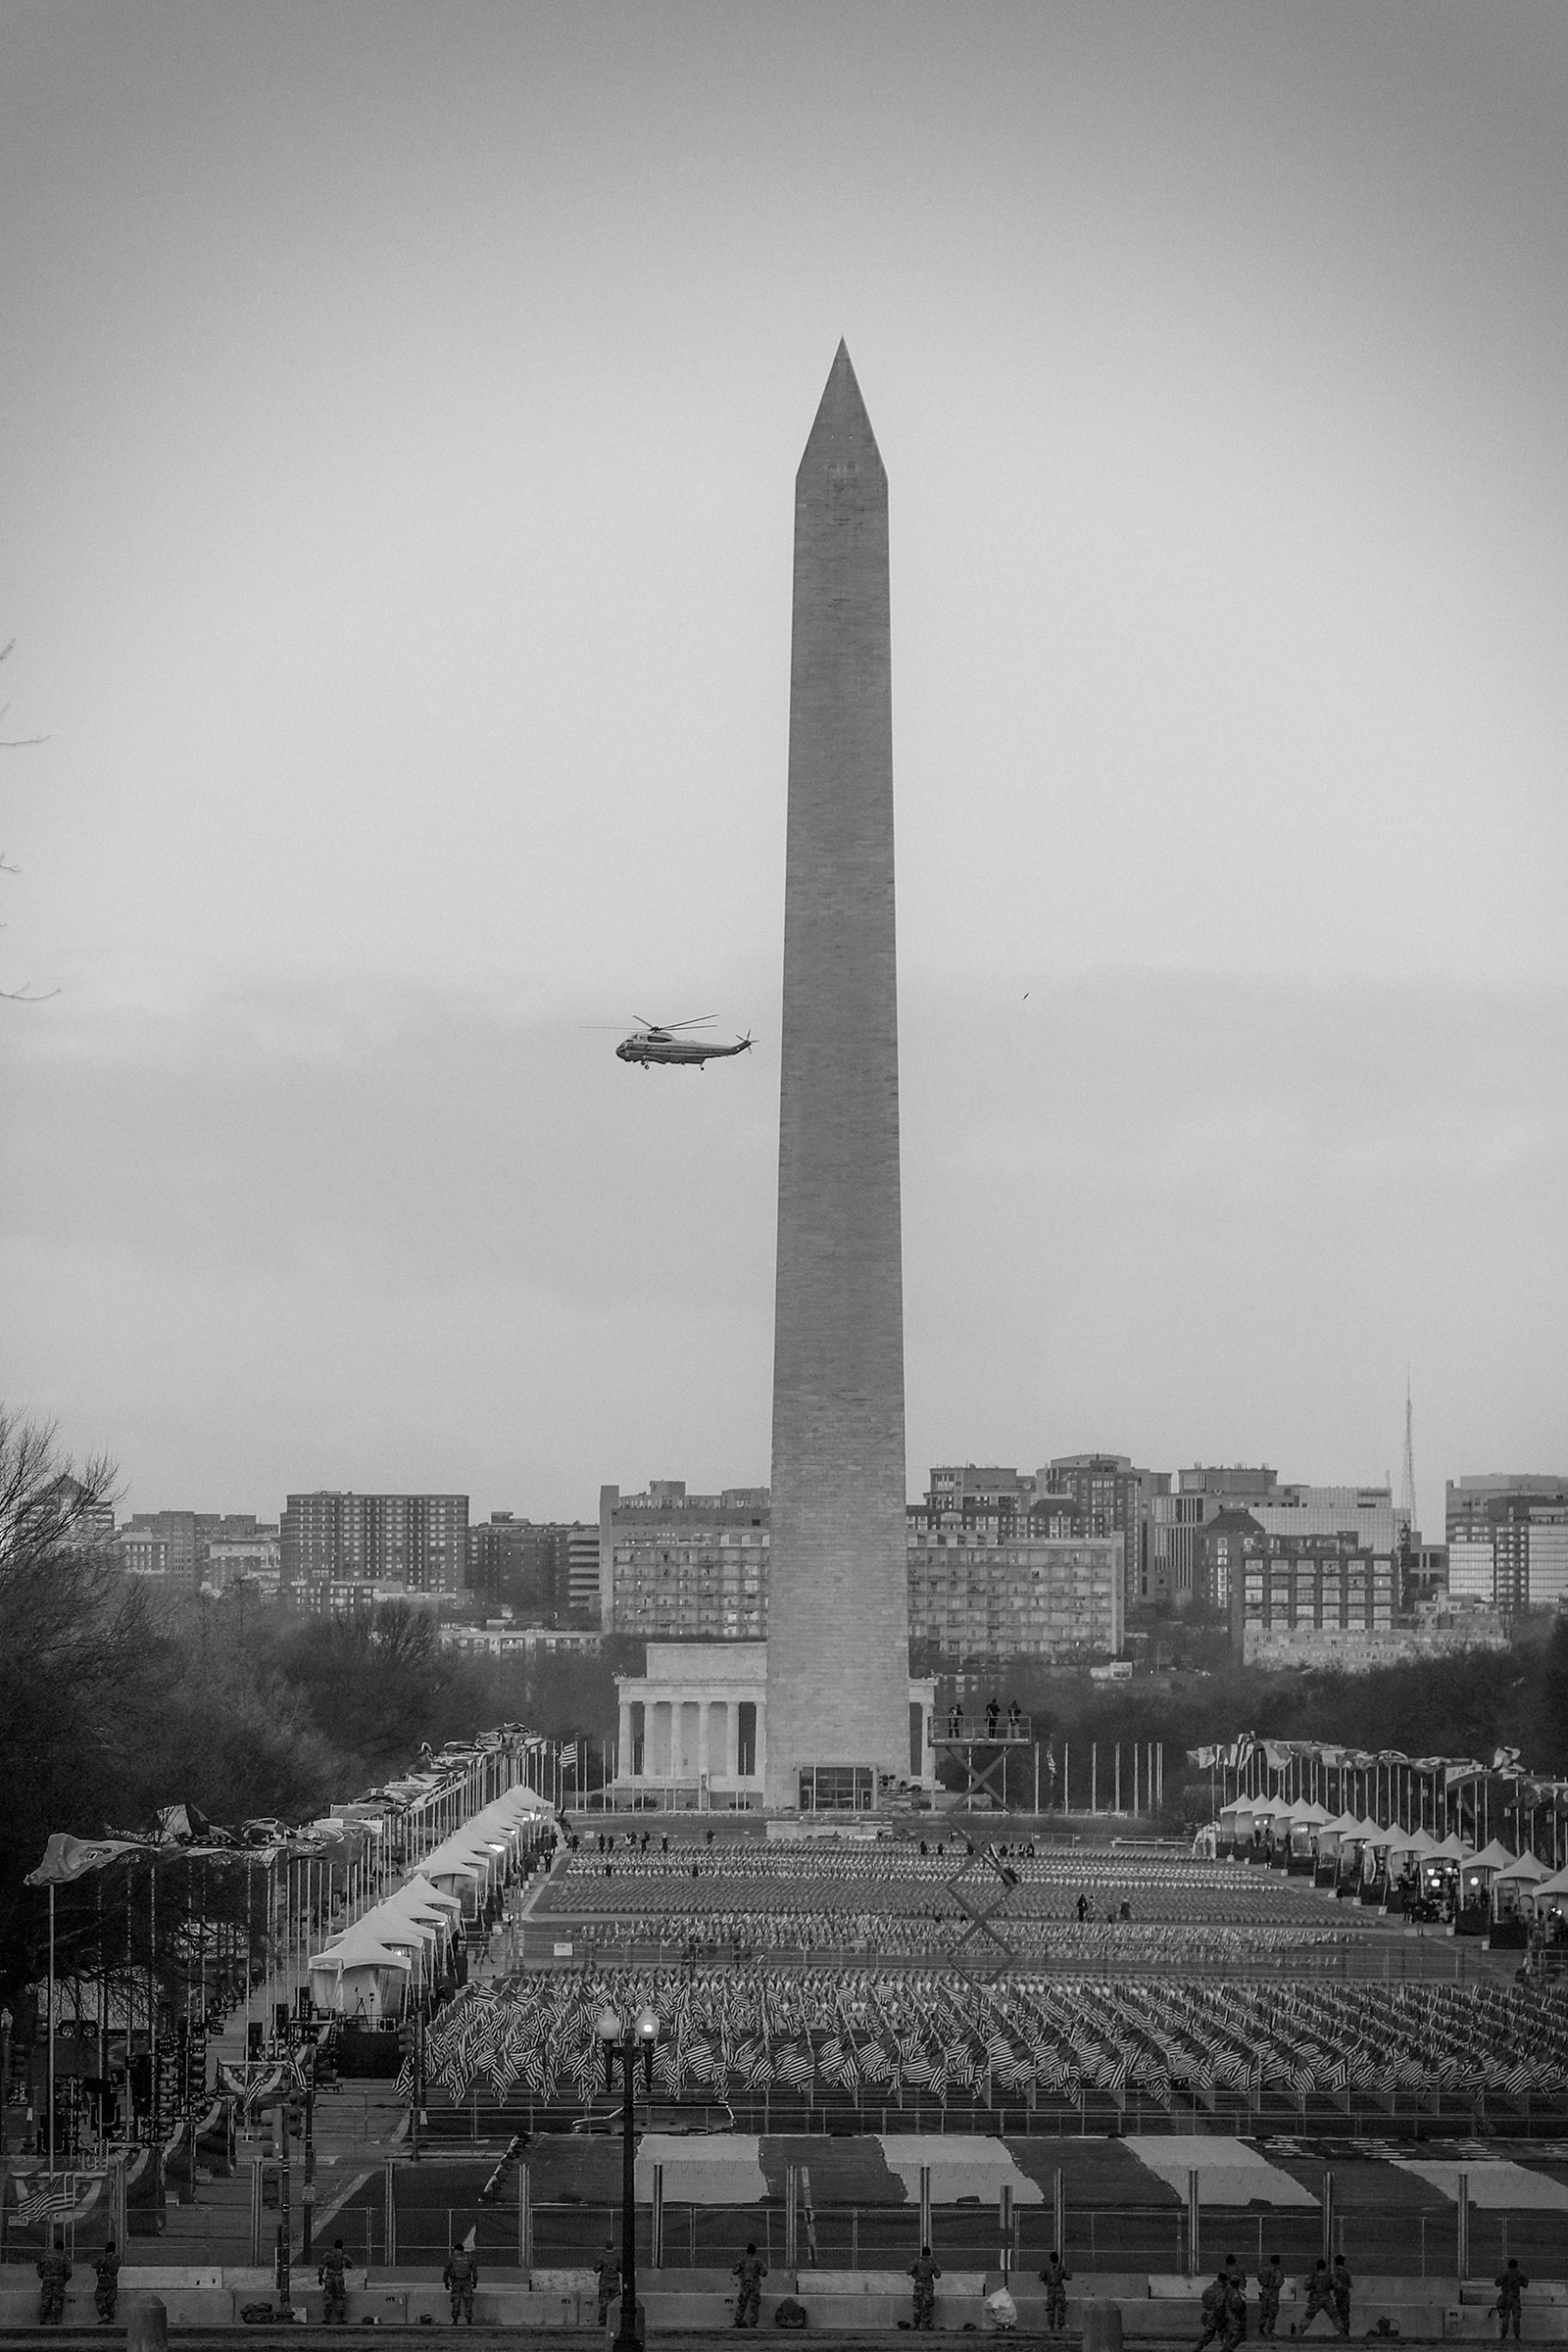 Marine One circles the National Mall carrying Donald Trump as he departs the White House ahead of the inauguration.